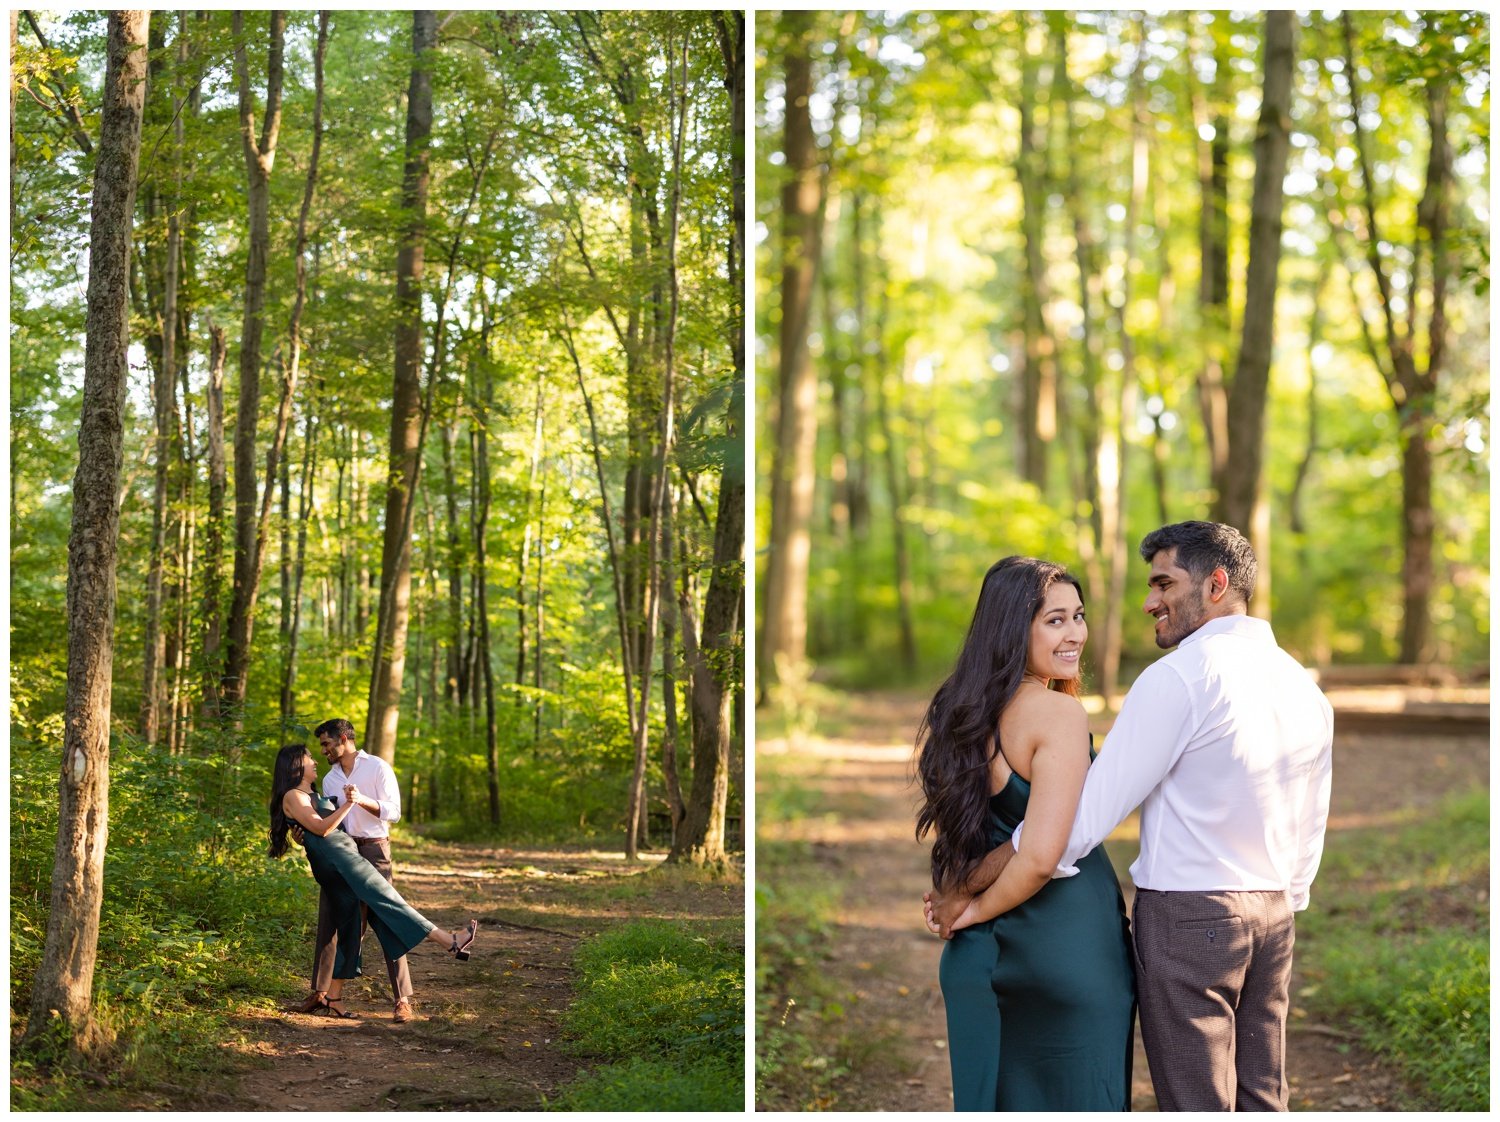 French-Creek-Park-PA-Summer-Lakeside-Engagement-Session-7.jpg